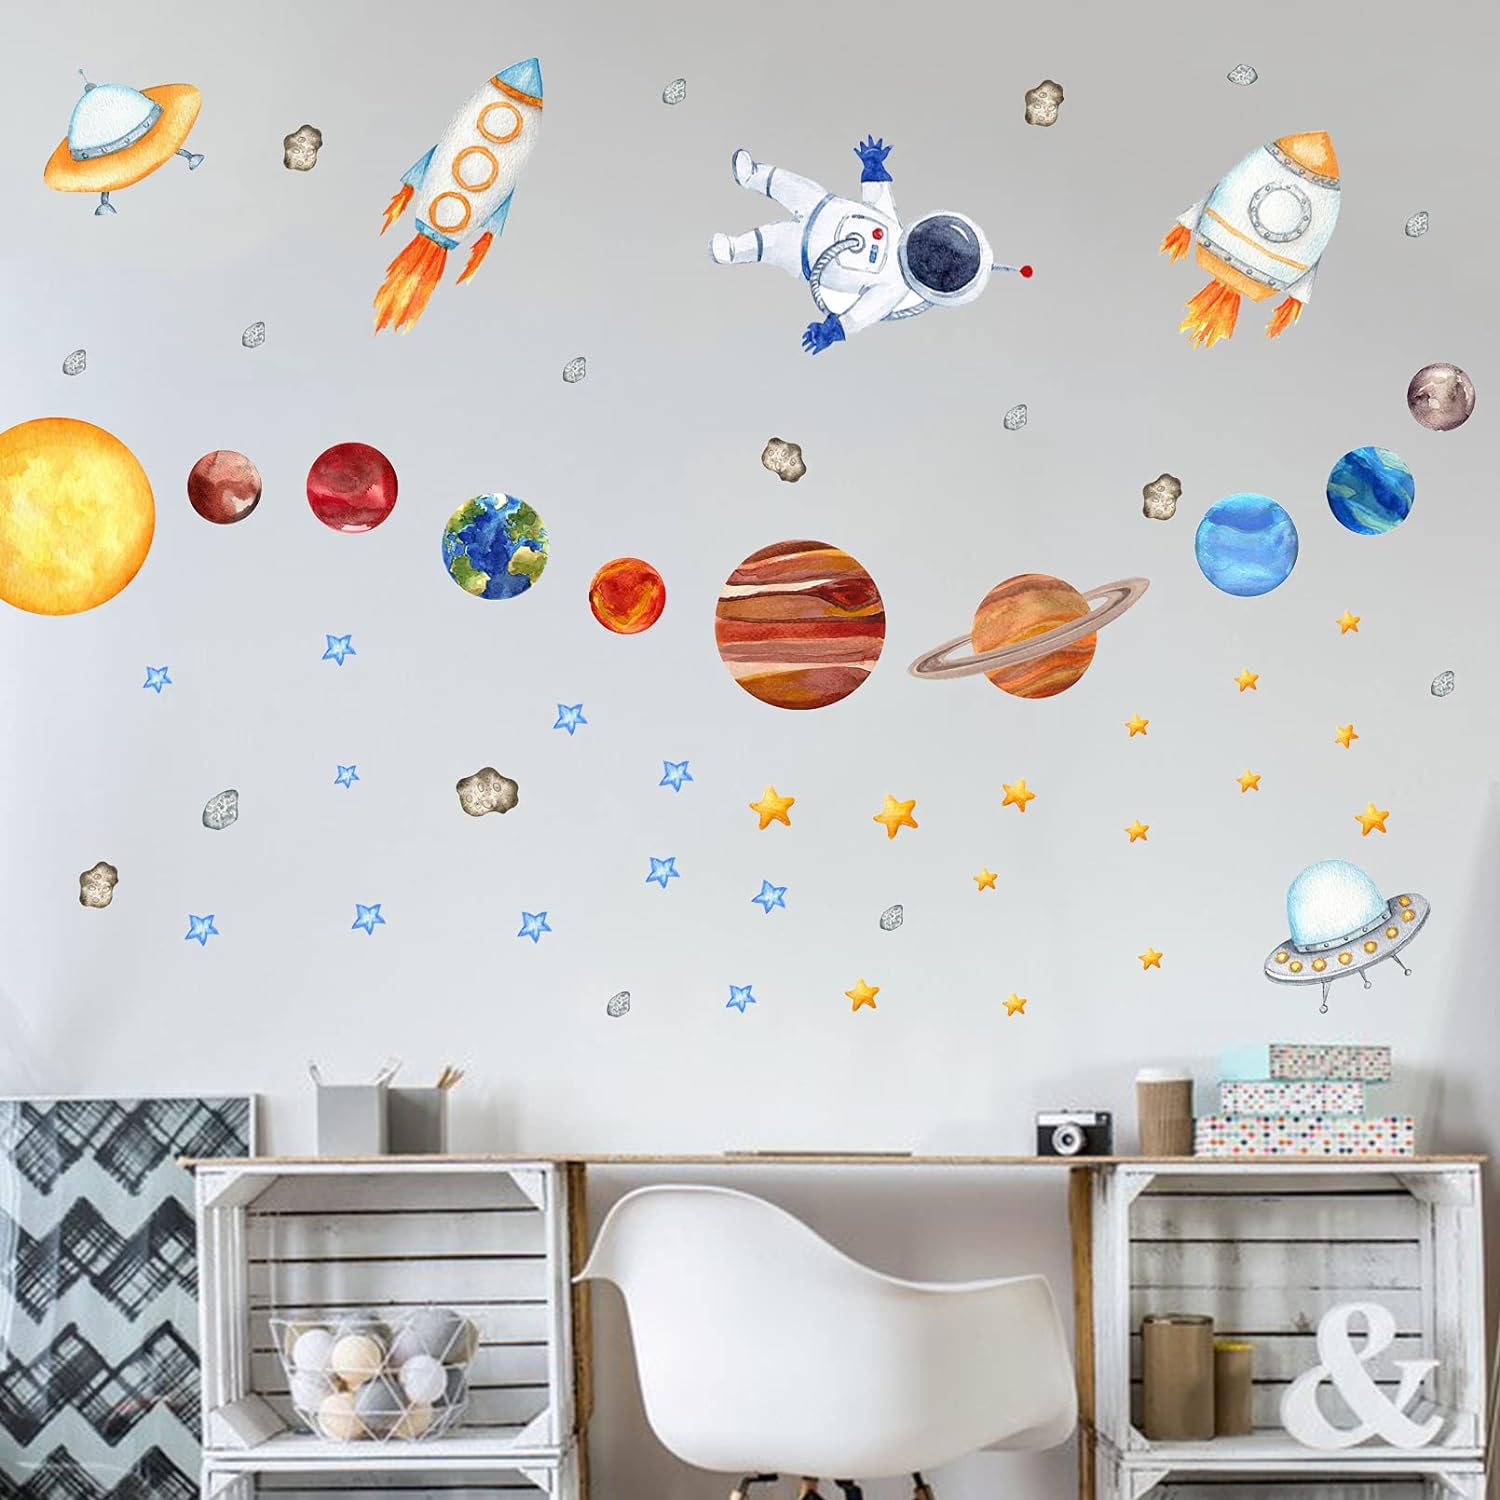 thinkstar Boys Outer Space Planet Astronaut Wall Decals Stickers, Watercolor Galaxy Solar System Spacecraft Rocket Cosmonaut Spacesh…